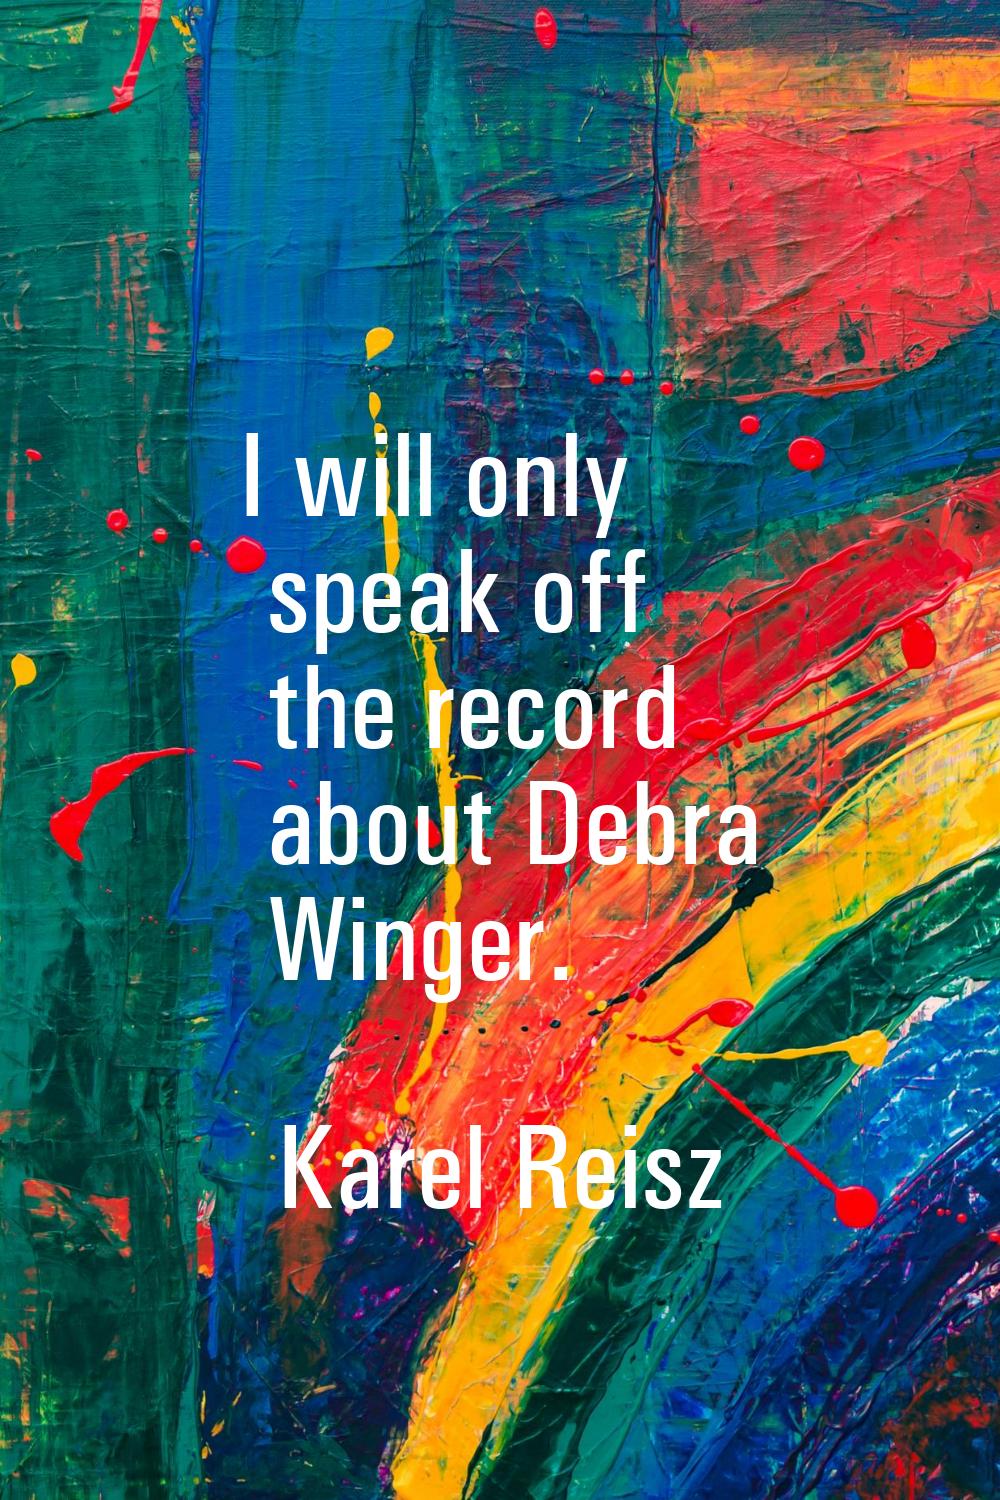 I will only speak off the record about Debra Winger.